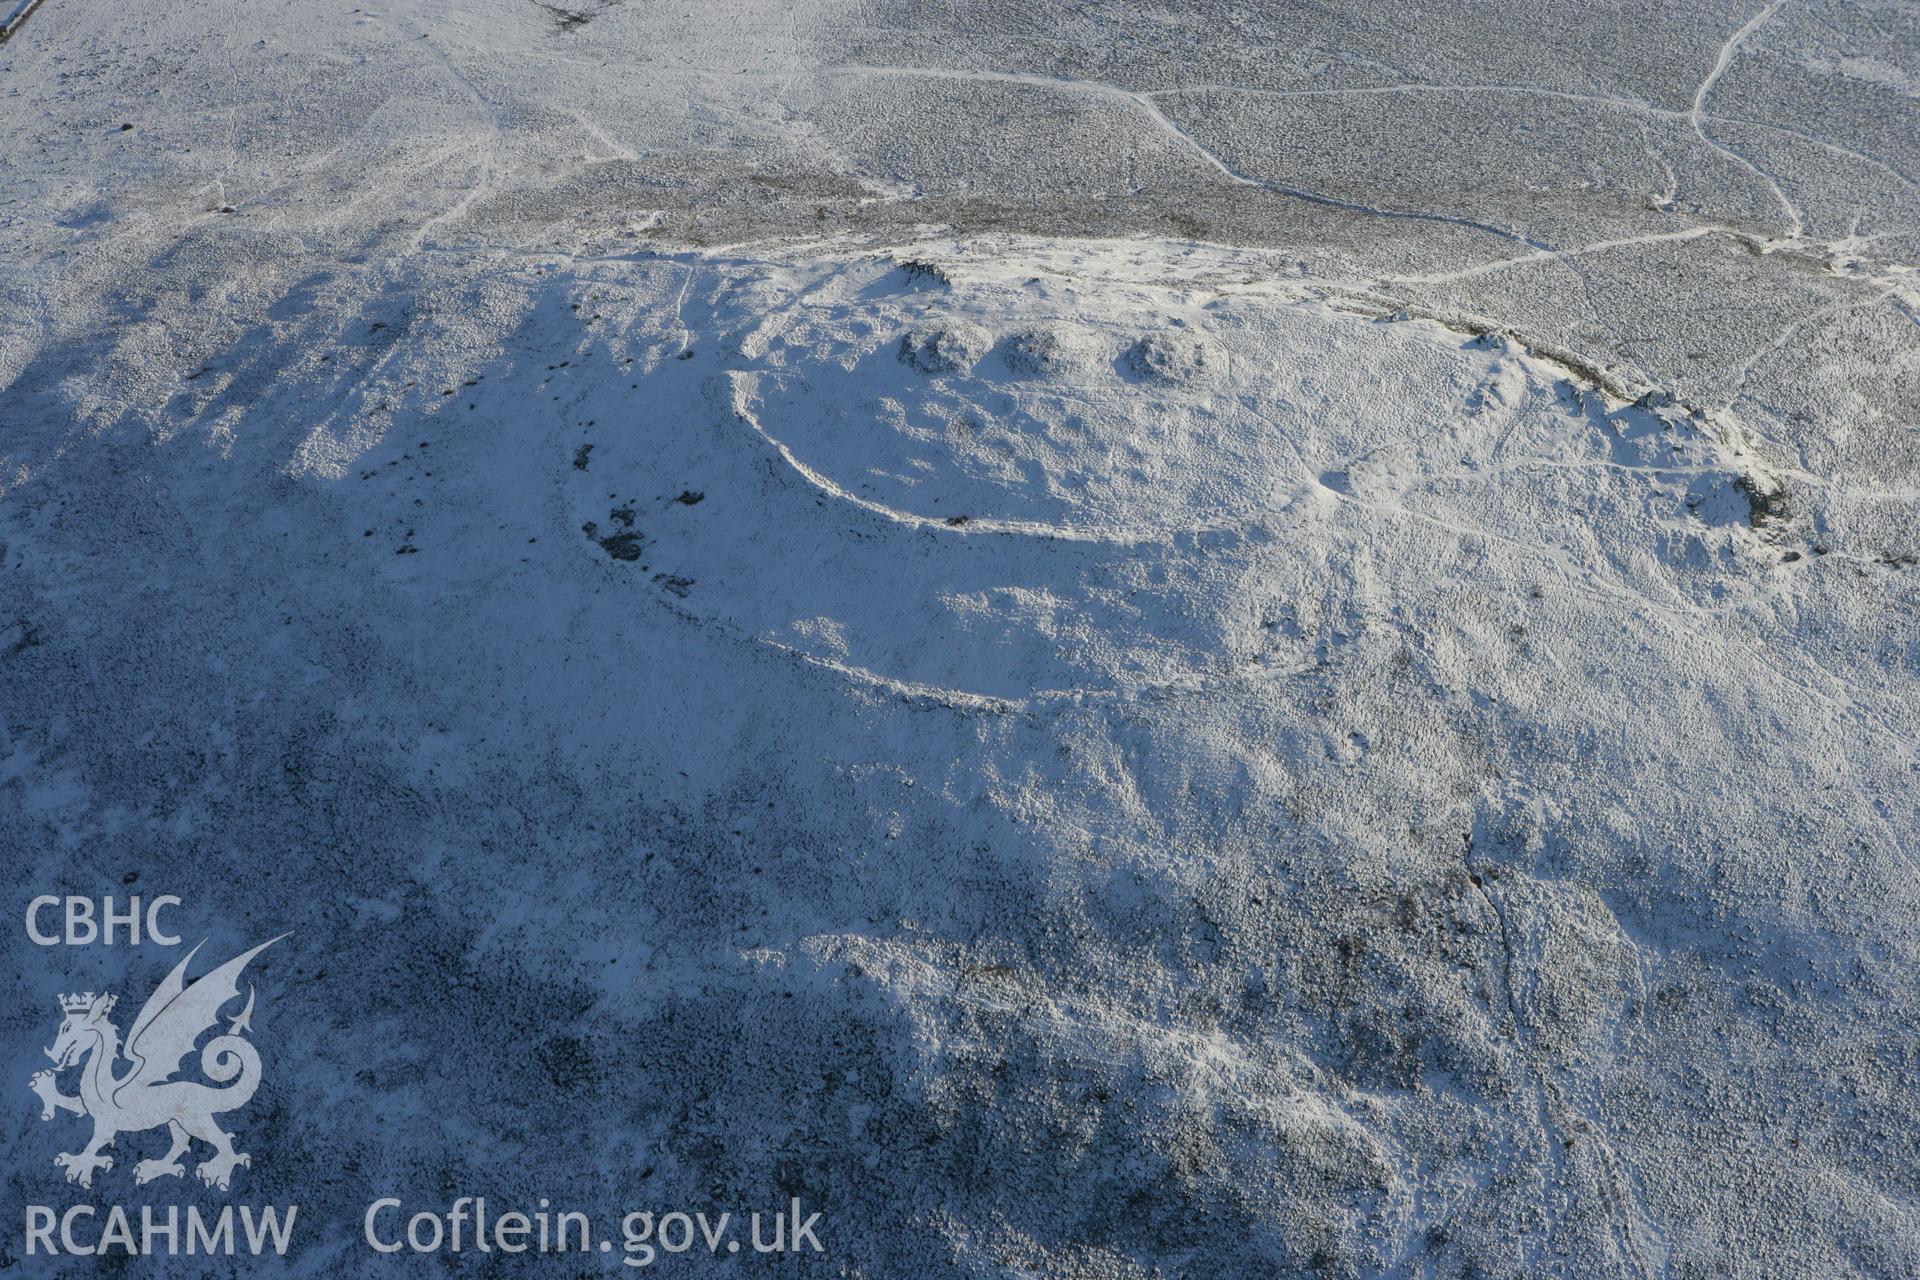 RCAHMW colour oblique photograph of Foel Drygarn hillfort. Taken by Toby Driver on 01/12/2010.